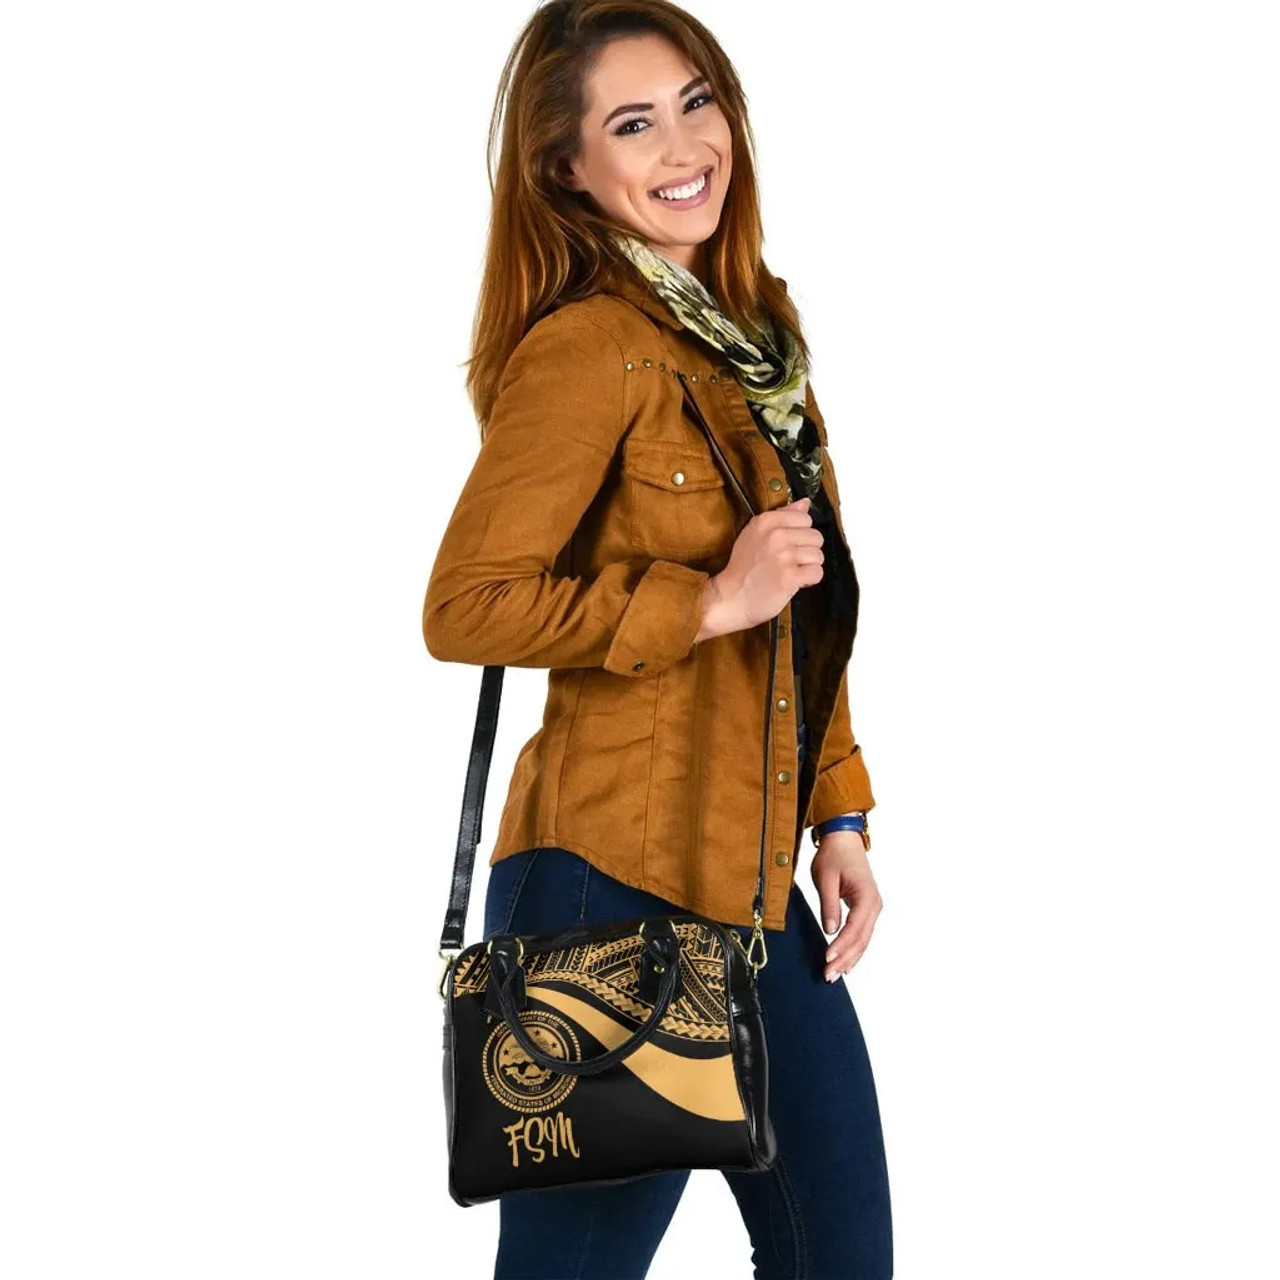 Federated States Of Micronesia Shoulder Handbag - Gold Polynesian Tentacle Tribal Pattern 5